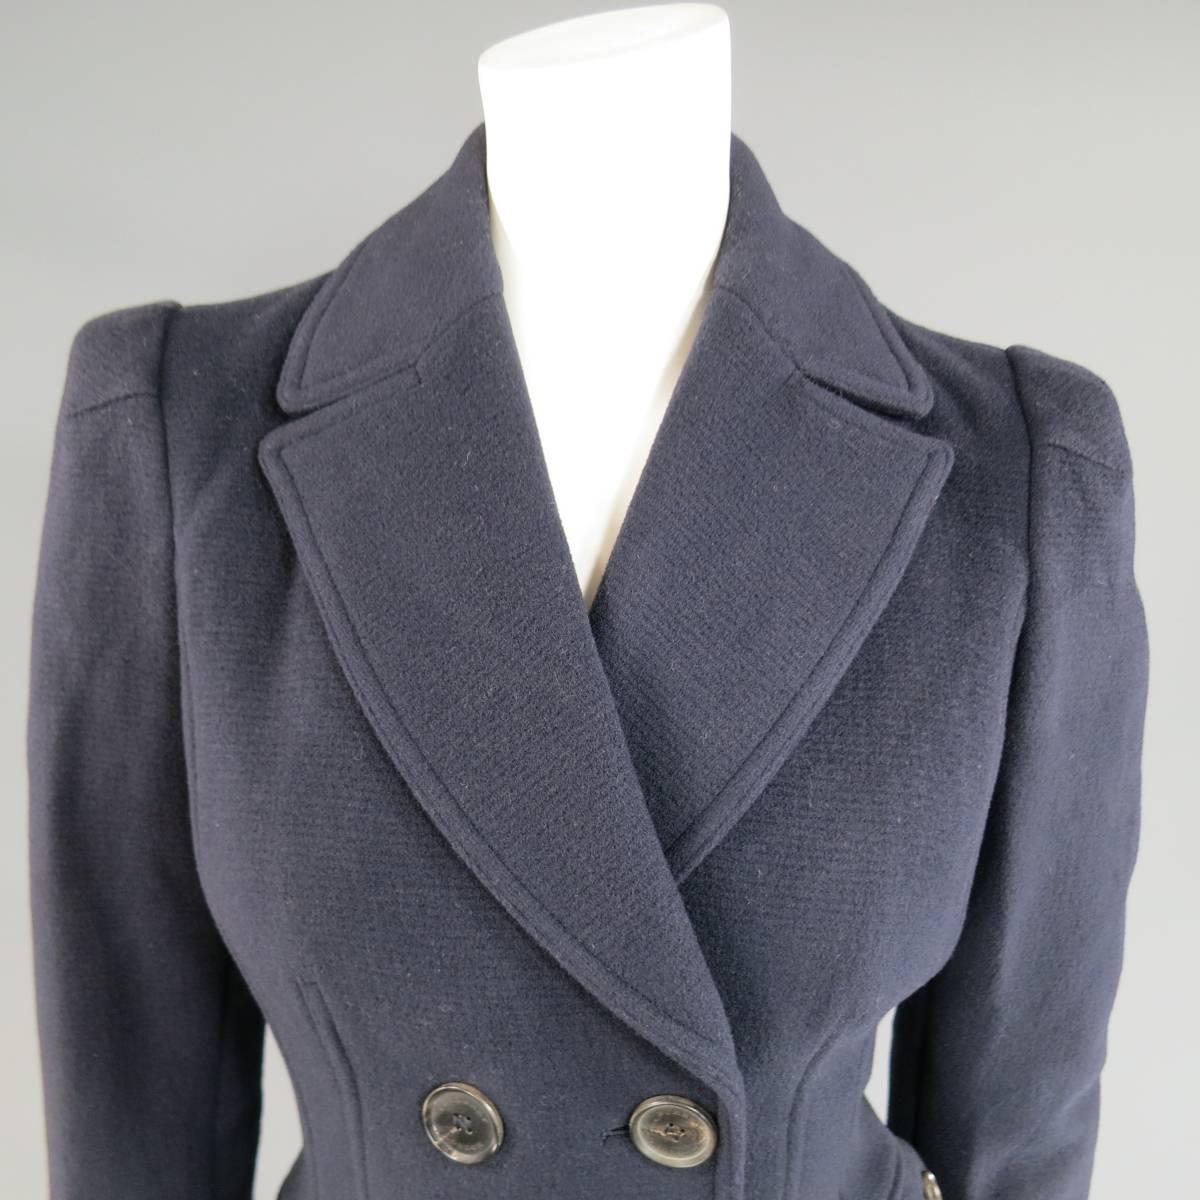 This gorgeous BURBERRY LONDON long peacoat comes in a navy bluye virgin wool blend and features a pointed lapel, double breasted button up closure, structured hourglass silhouette, pleated shoulder sleeves, double button pockets, and back belt